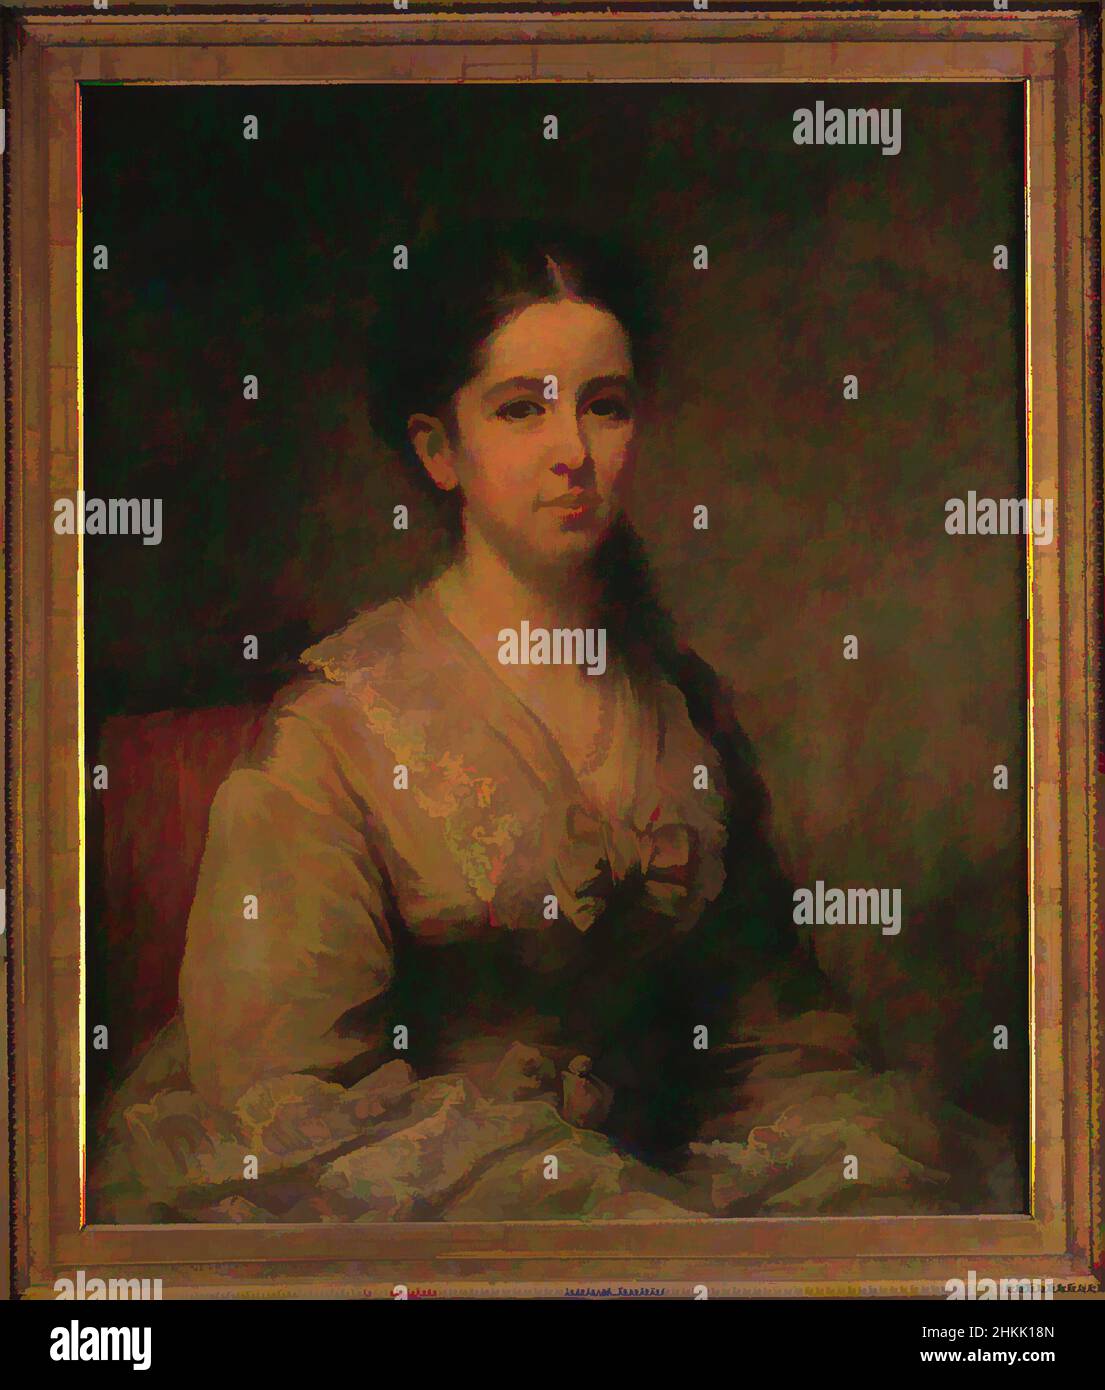 Art inspired by Ella M. Clapp Southwick, George Augustus Baker Jr., American, 1821-1880, Oil on canvas, 1869, 30 x 24 7/8in., 76.2 x 63.2cm, 1869, bow, brown, dress, earring, female figure, girl, lace, painting, portrait, seated, Classic works modernized by Artotop with a splash of modernity. Shapes, color and value, eye-catching visual impact on art. Emotions through freedom of artworks in a contemporary way. A timeless message pursuing a wildly creative new direction. Artists turning to the digital medium and creating the Artotop NFT Stock Photo